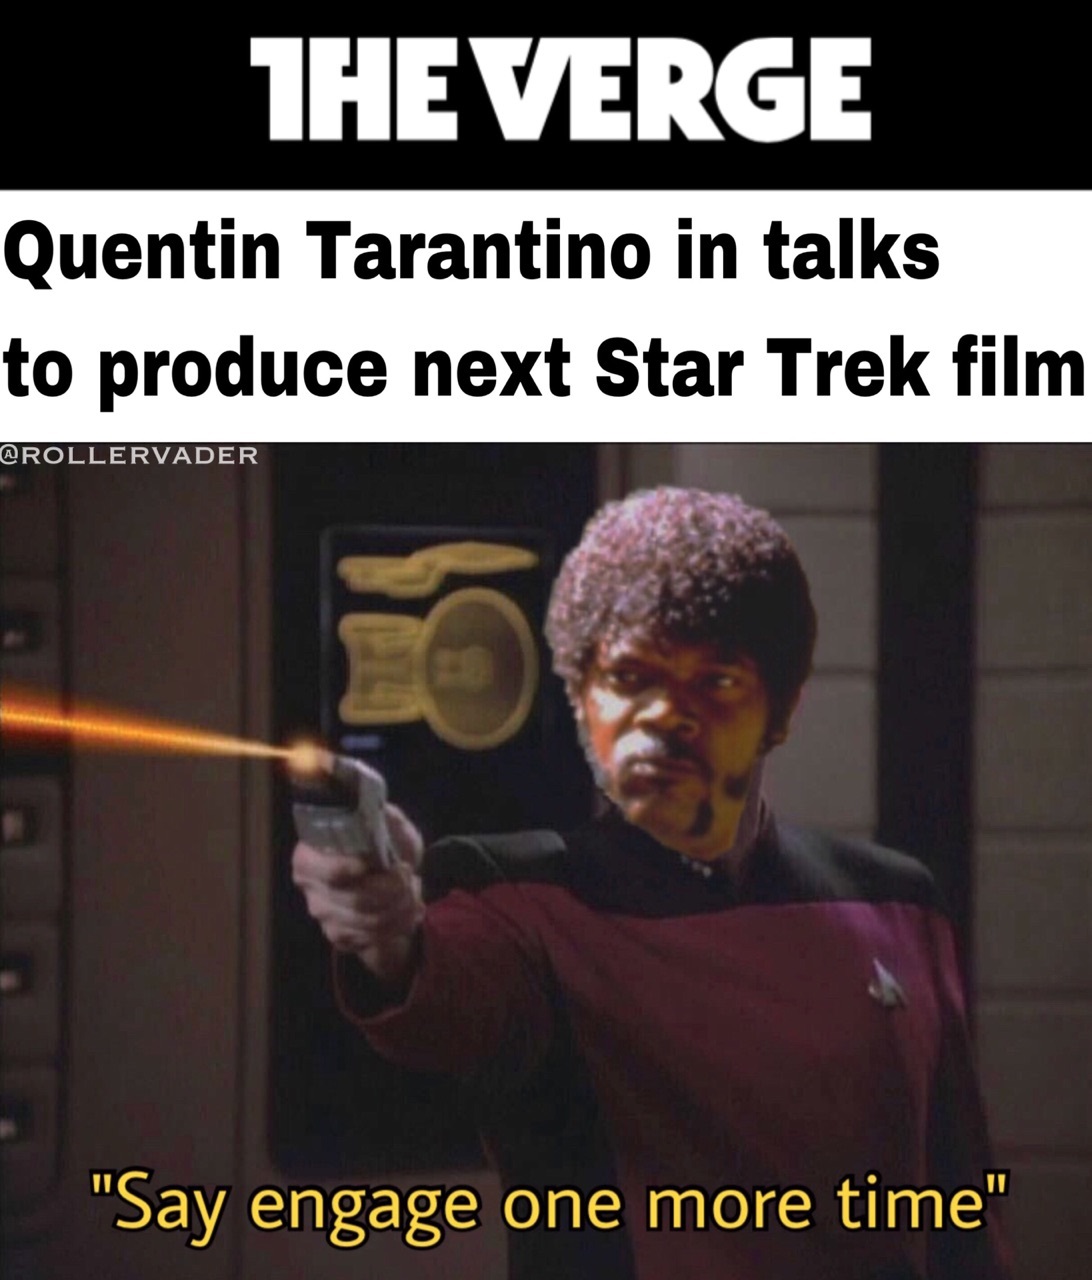 Photoshopped meme of Quinten Tarantino is going to direct Star Trek with the verbose Jules Verne daring someone to say engage one more time